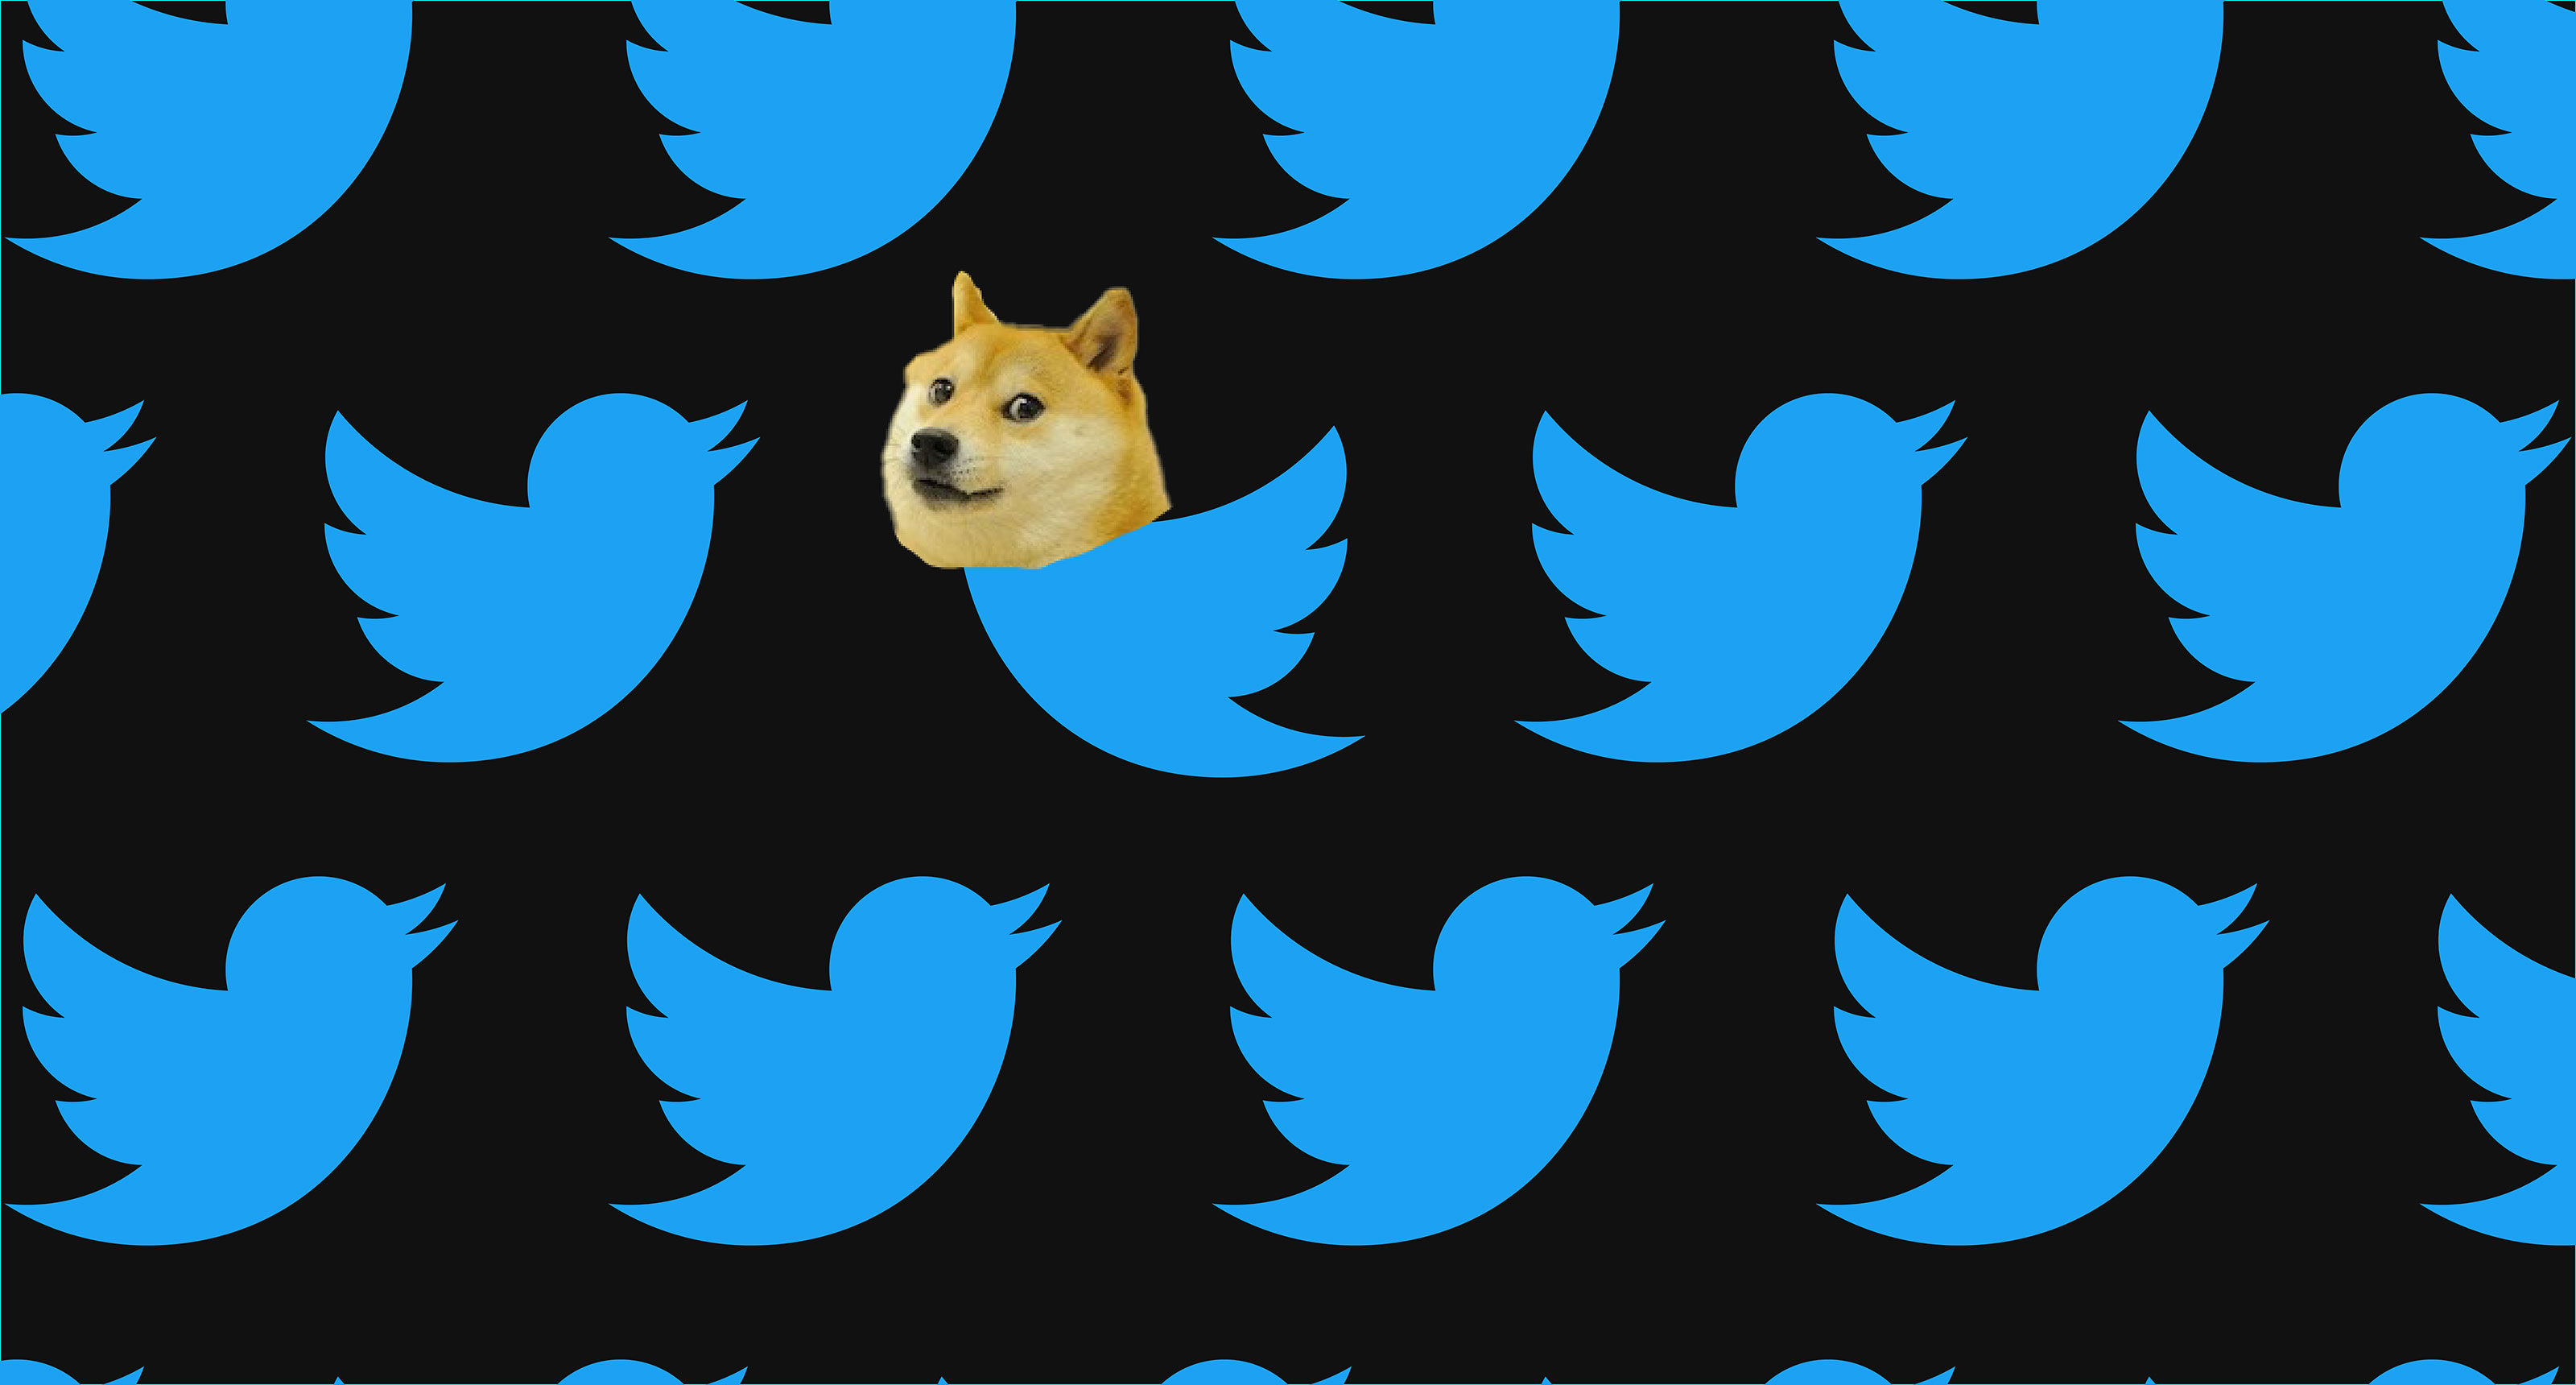 7 Space Doge Wallpapers In HD   Doge much wow Wallpaper Doge